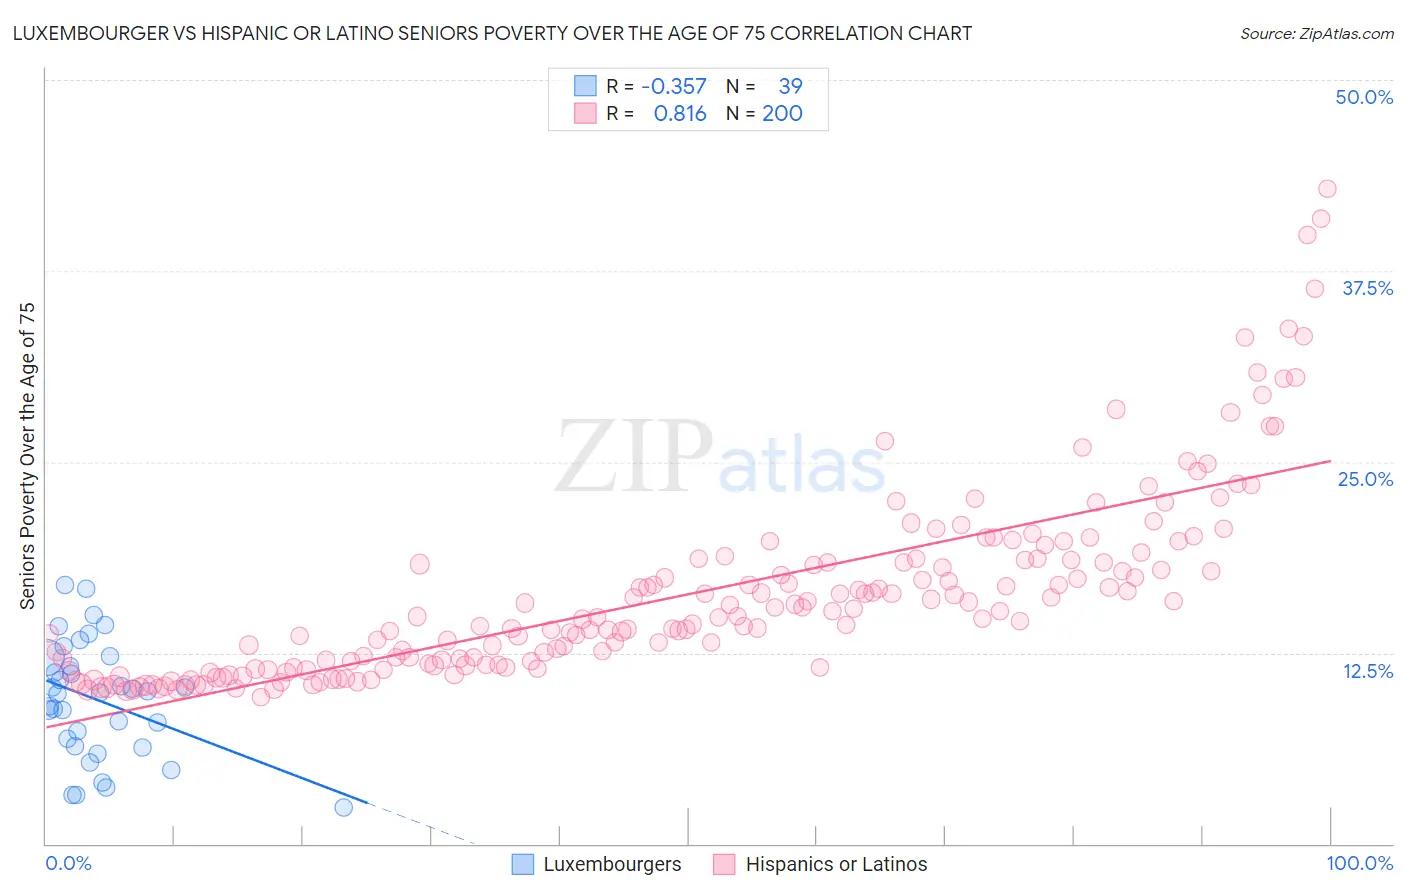 Luxembourger vs Hispanic or Latino Seniors Poverty Over the Age of 75